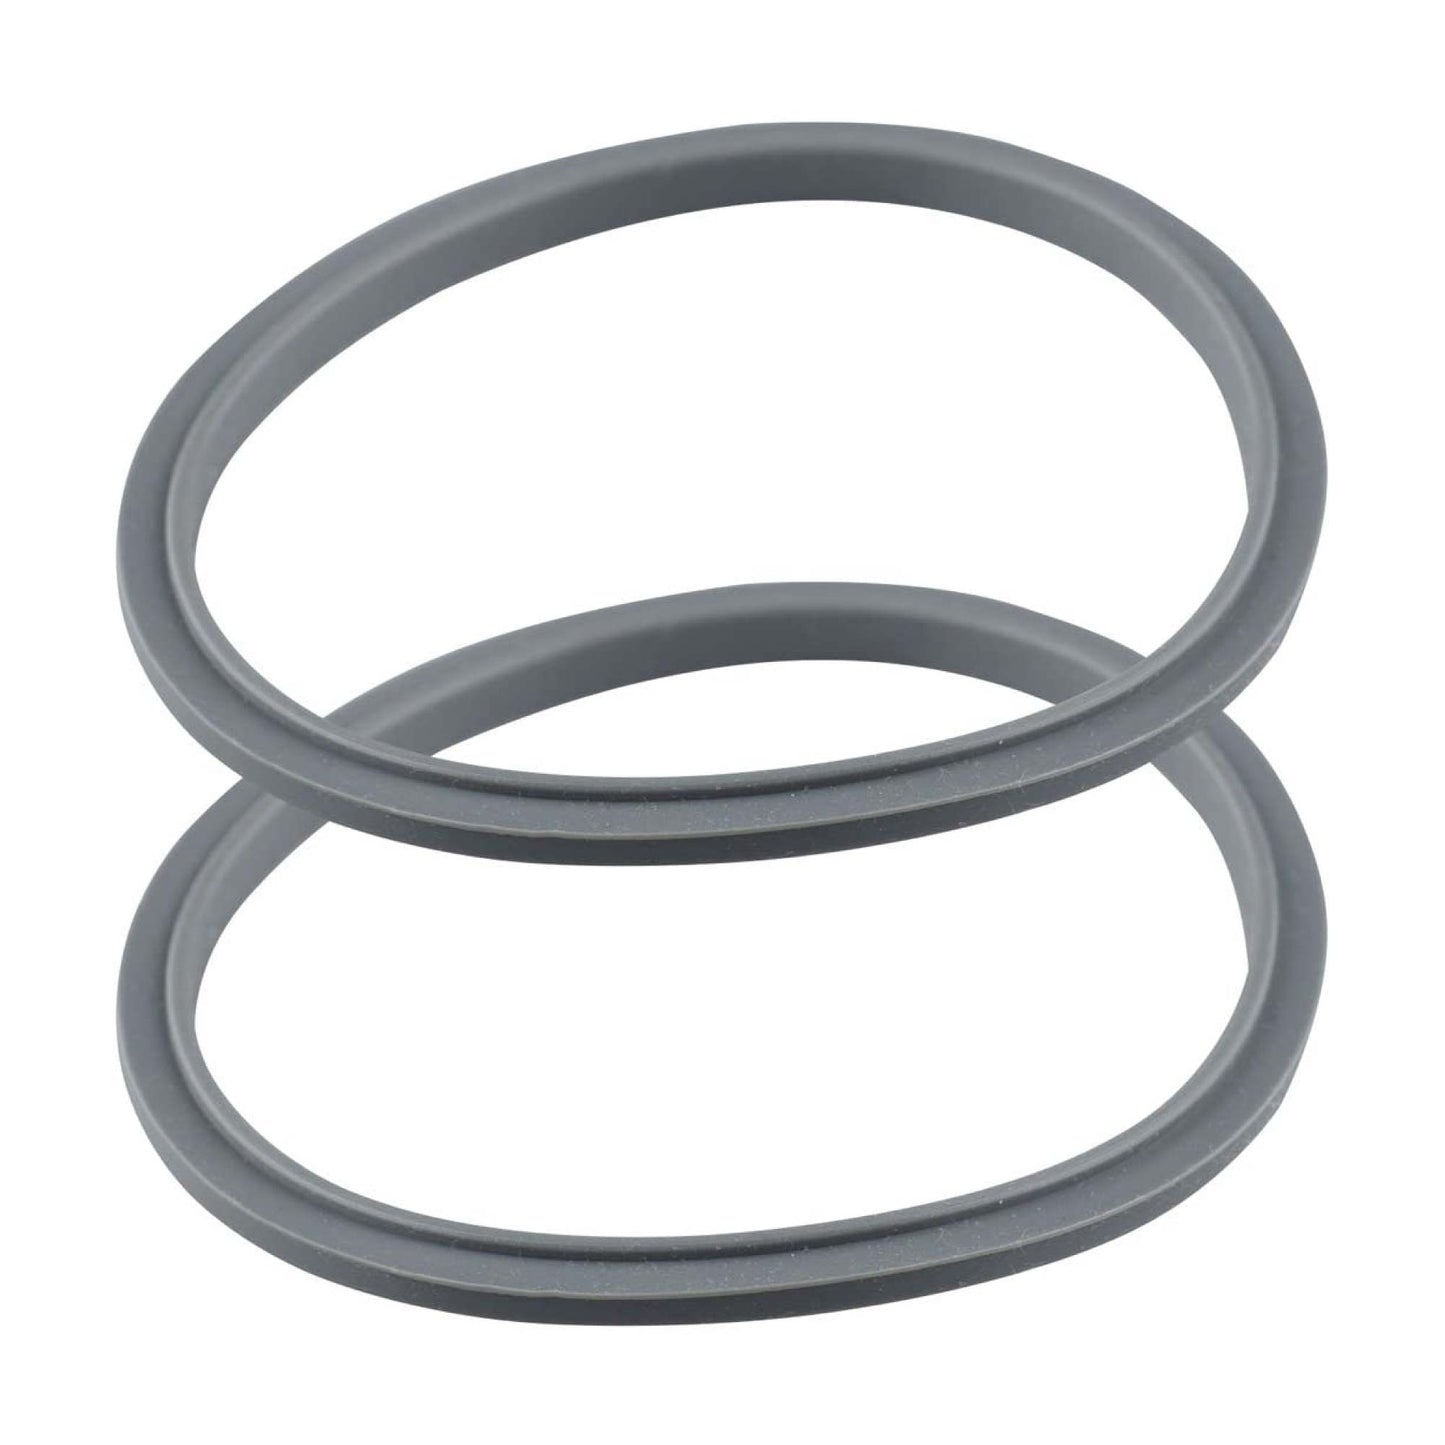 2x For Nutribullet Gasket Seal Grey Ring For 900W - Most 600W 1200W Blade